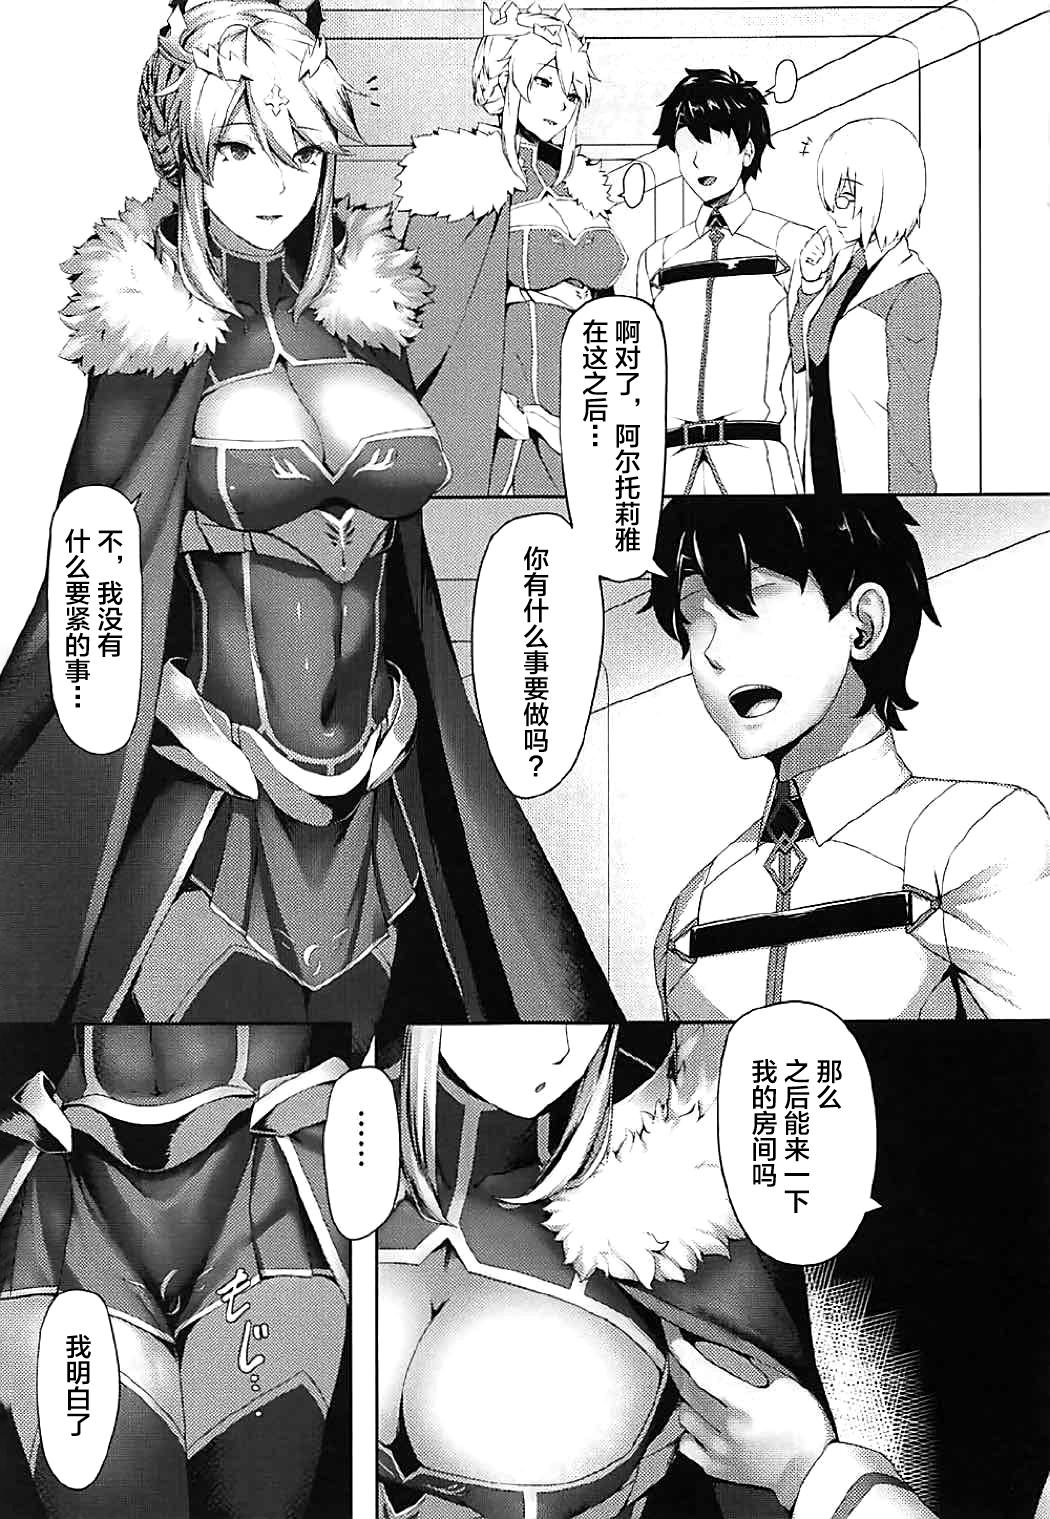 Mexico What do you like? - Fate grand order Amateur Sex - Page 2